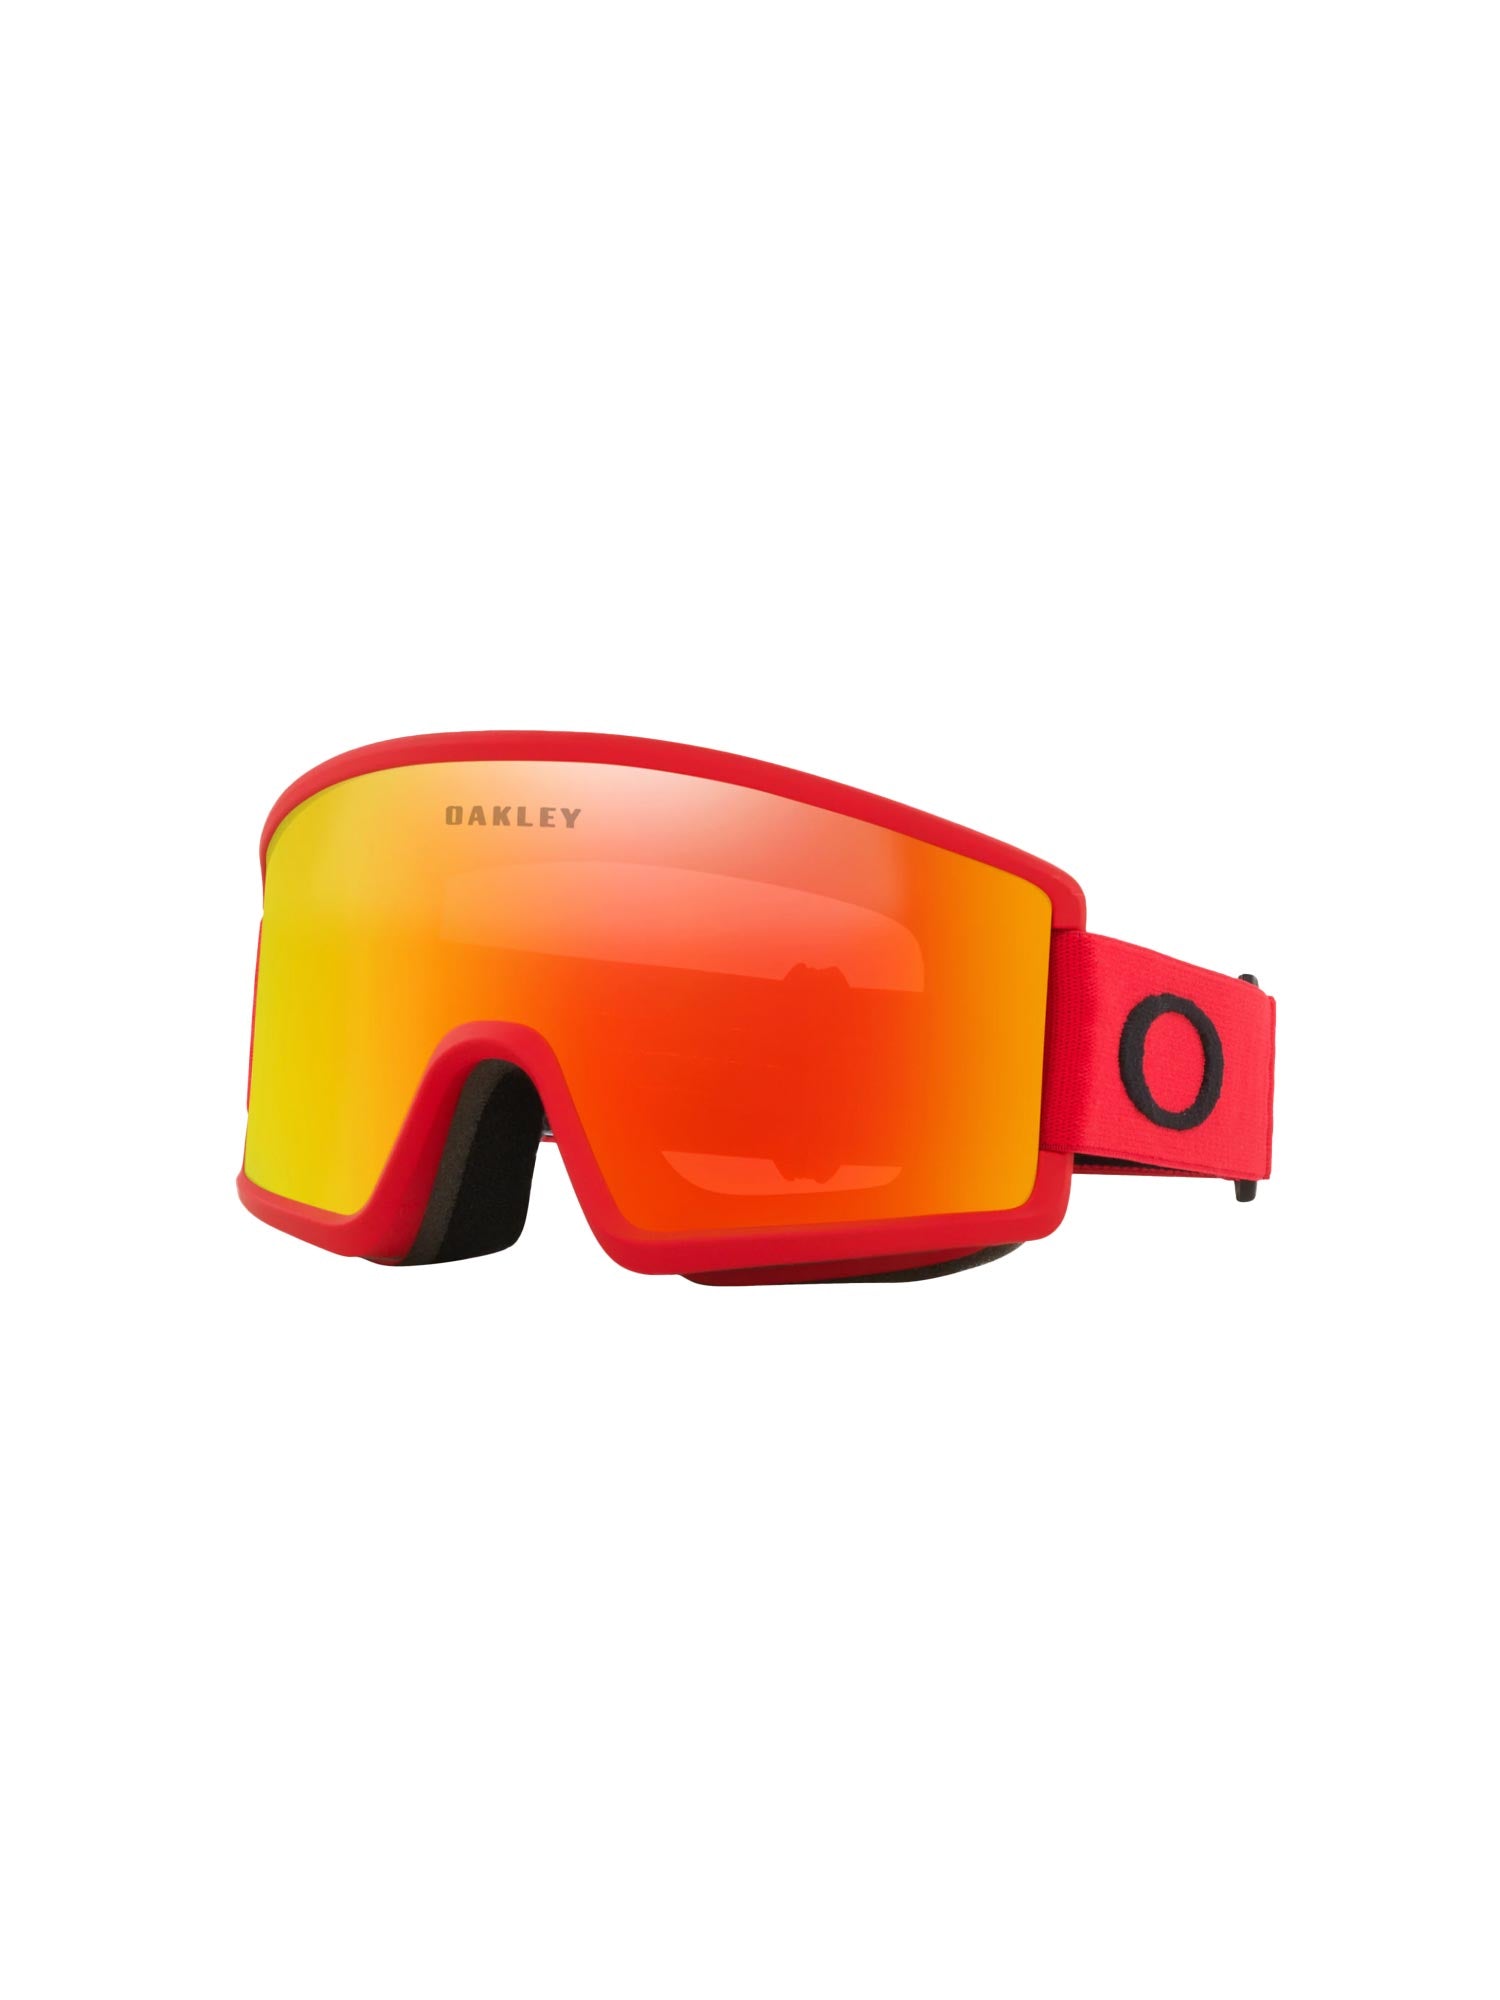 Oakley Target Line ski goggle, red strap and red lens